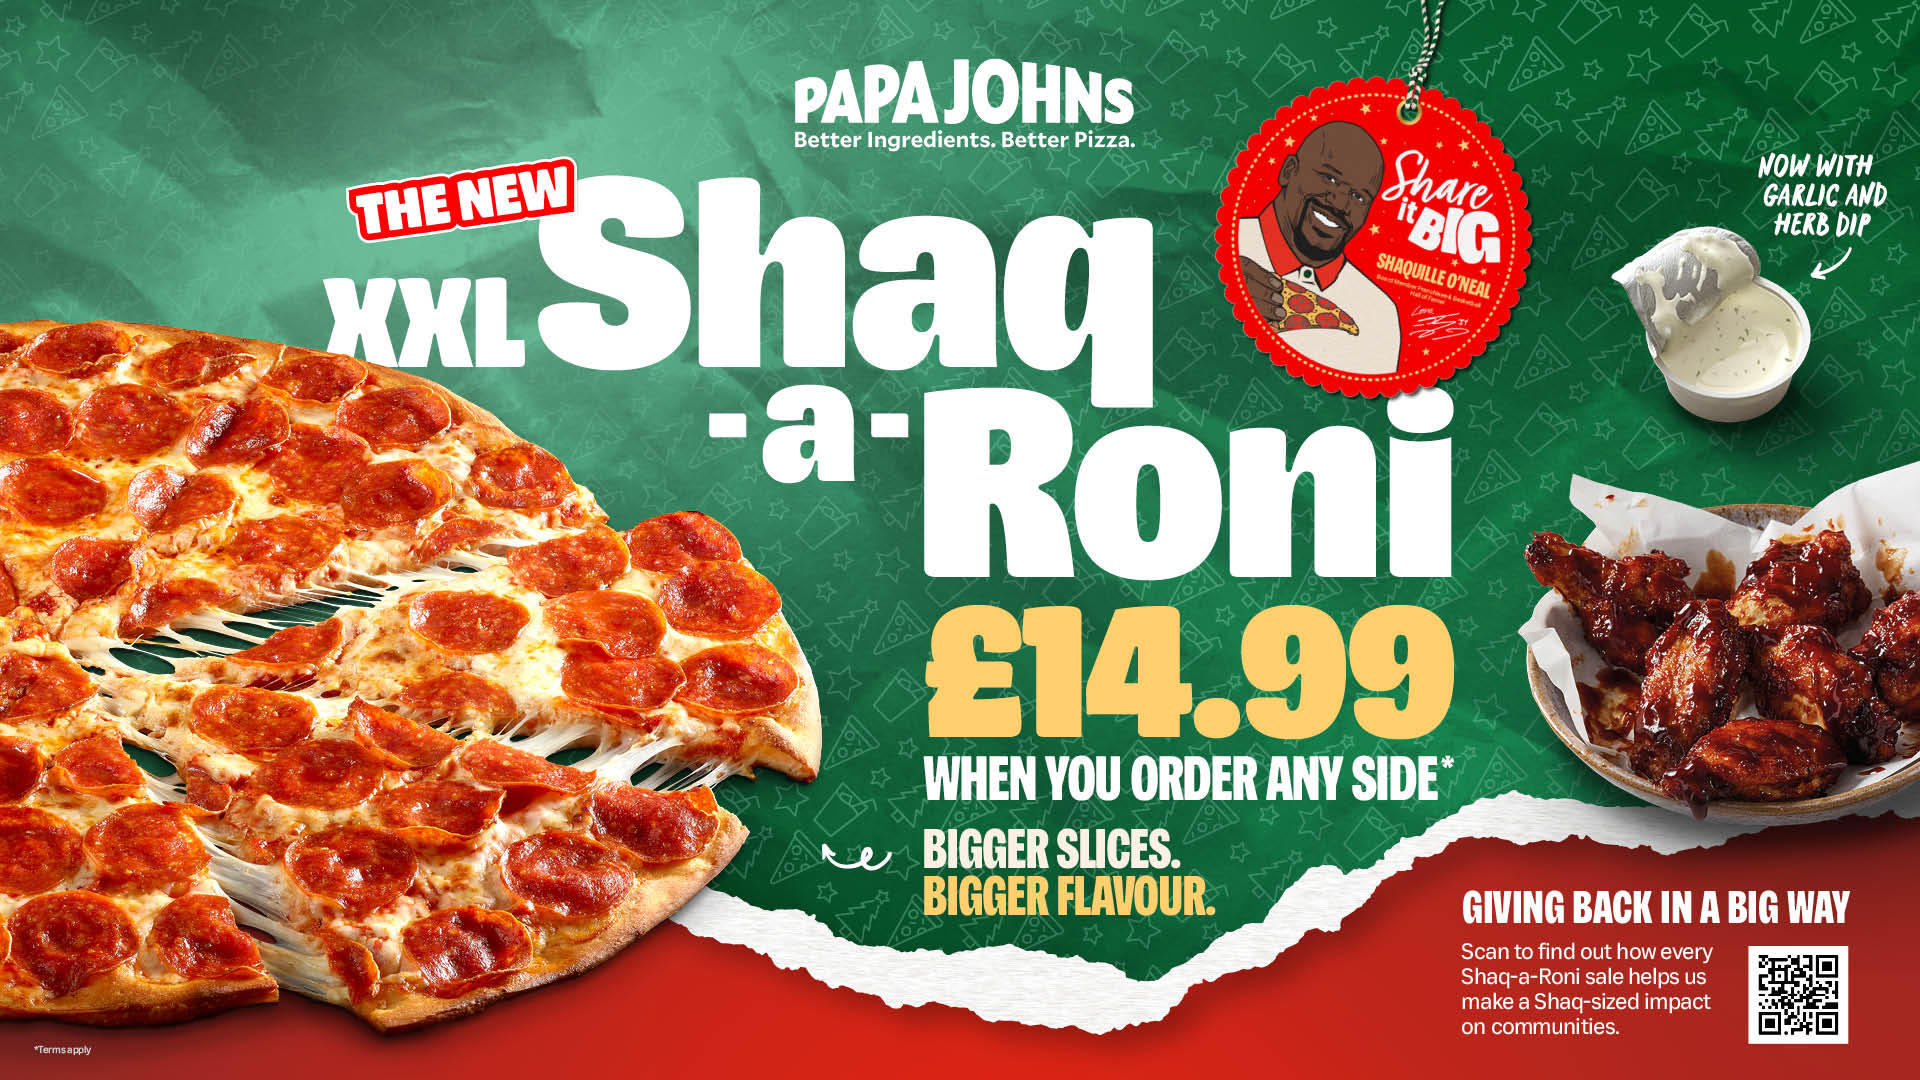 Papa Johns Looks to Help Relieve Hunger Through Sales of Its Shaq-a-Roni  Pizza